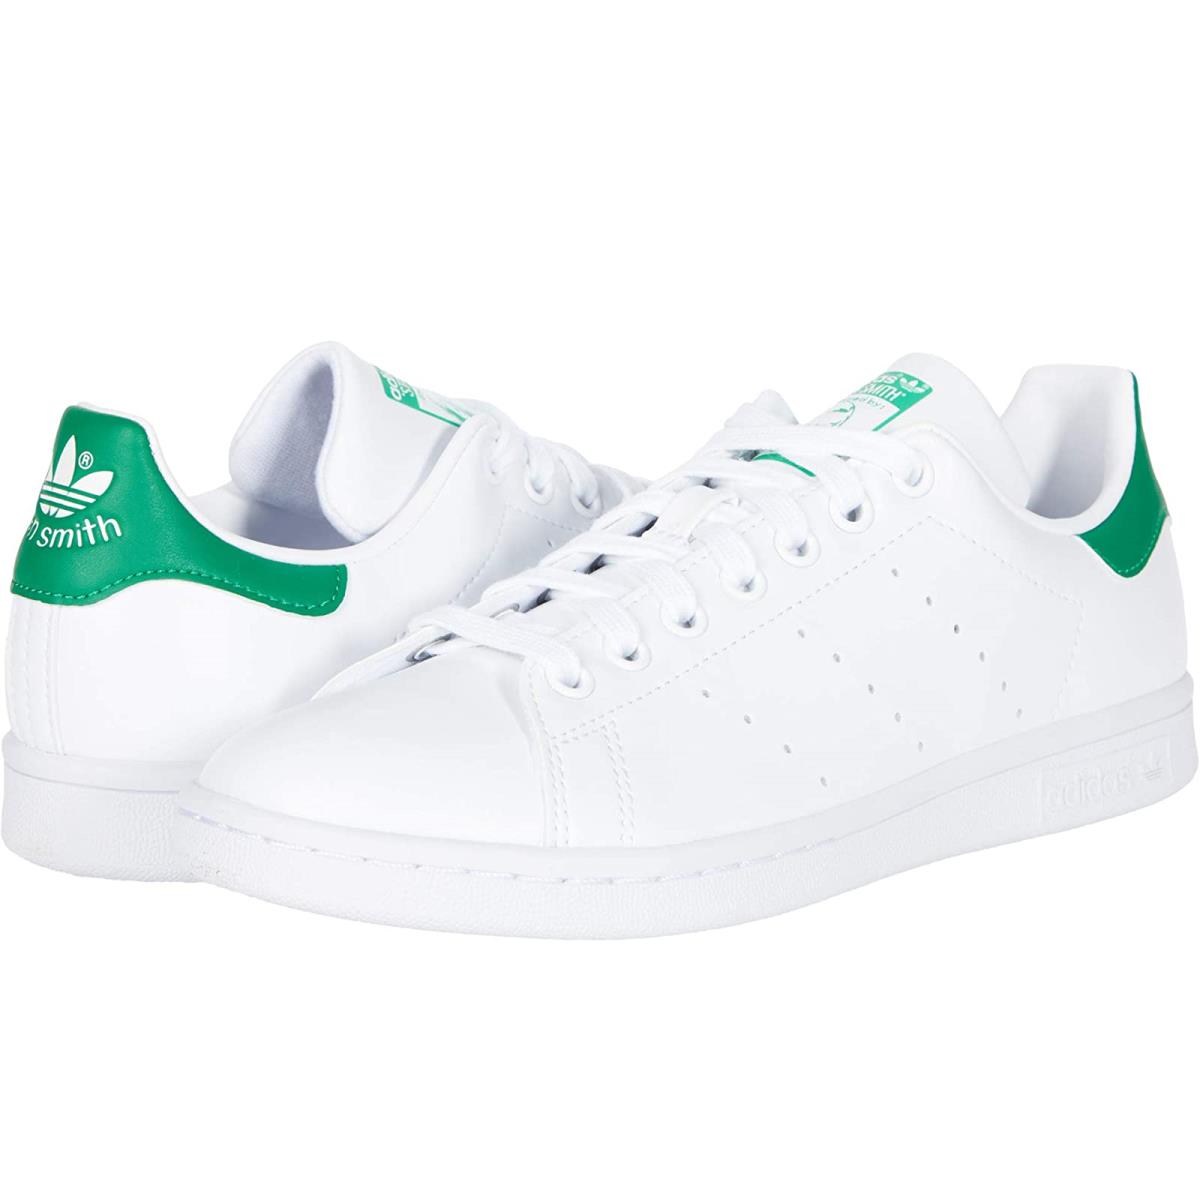 Woman`s Sneakers Athletic Shoes Adidas Originals Stan Smith Footwear White/Green/Footwear White